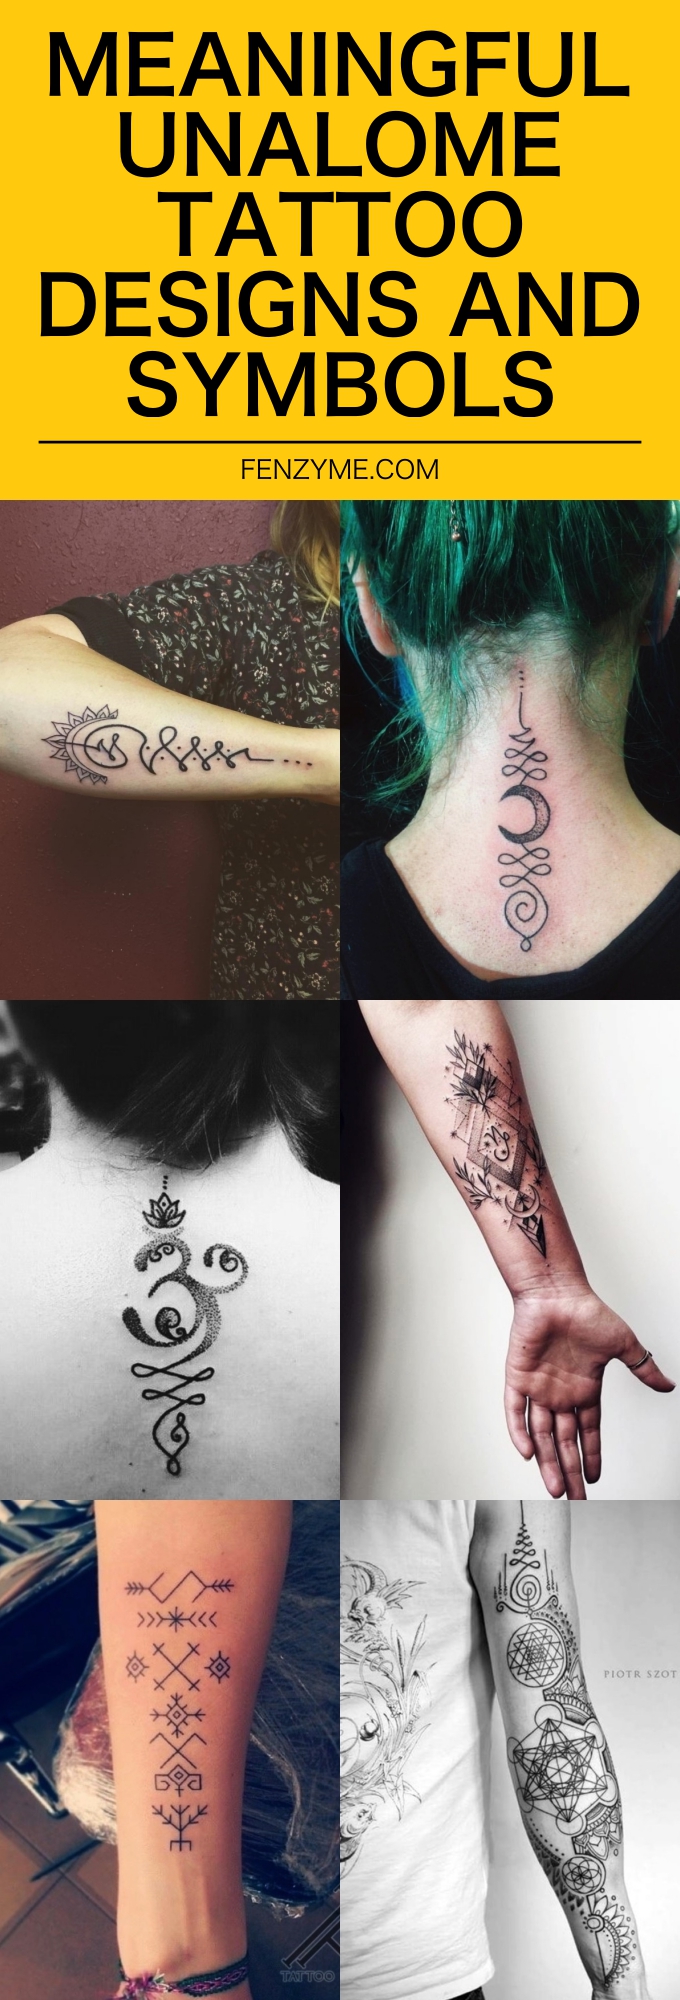 Meaningful Unalome Tattoo Designs and Symbols